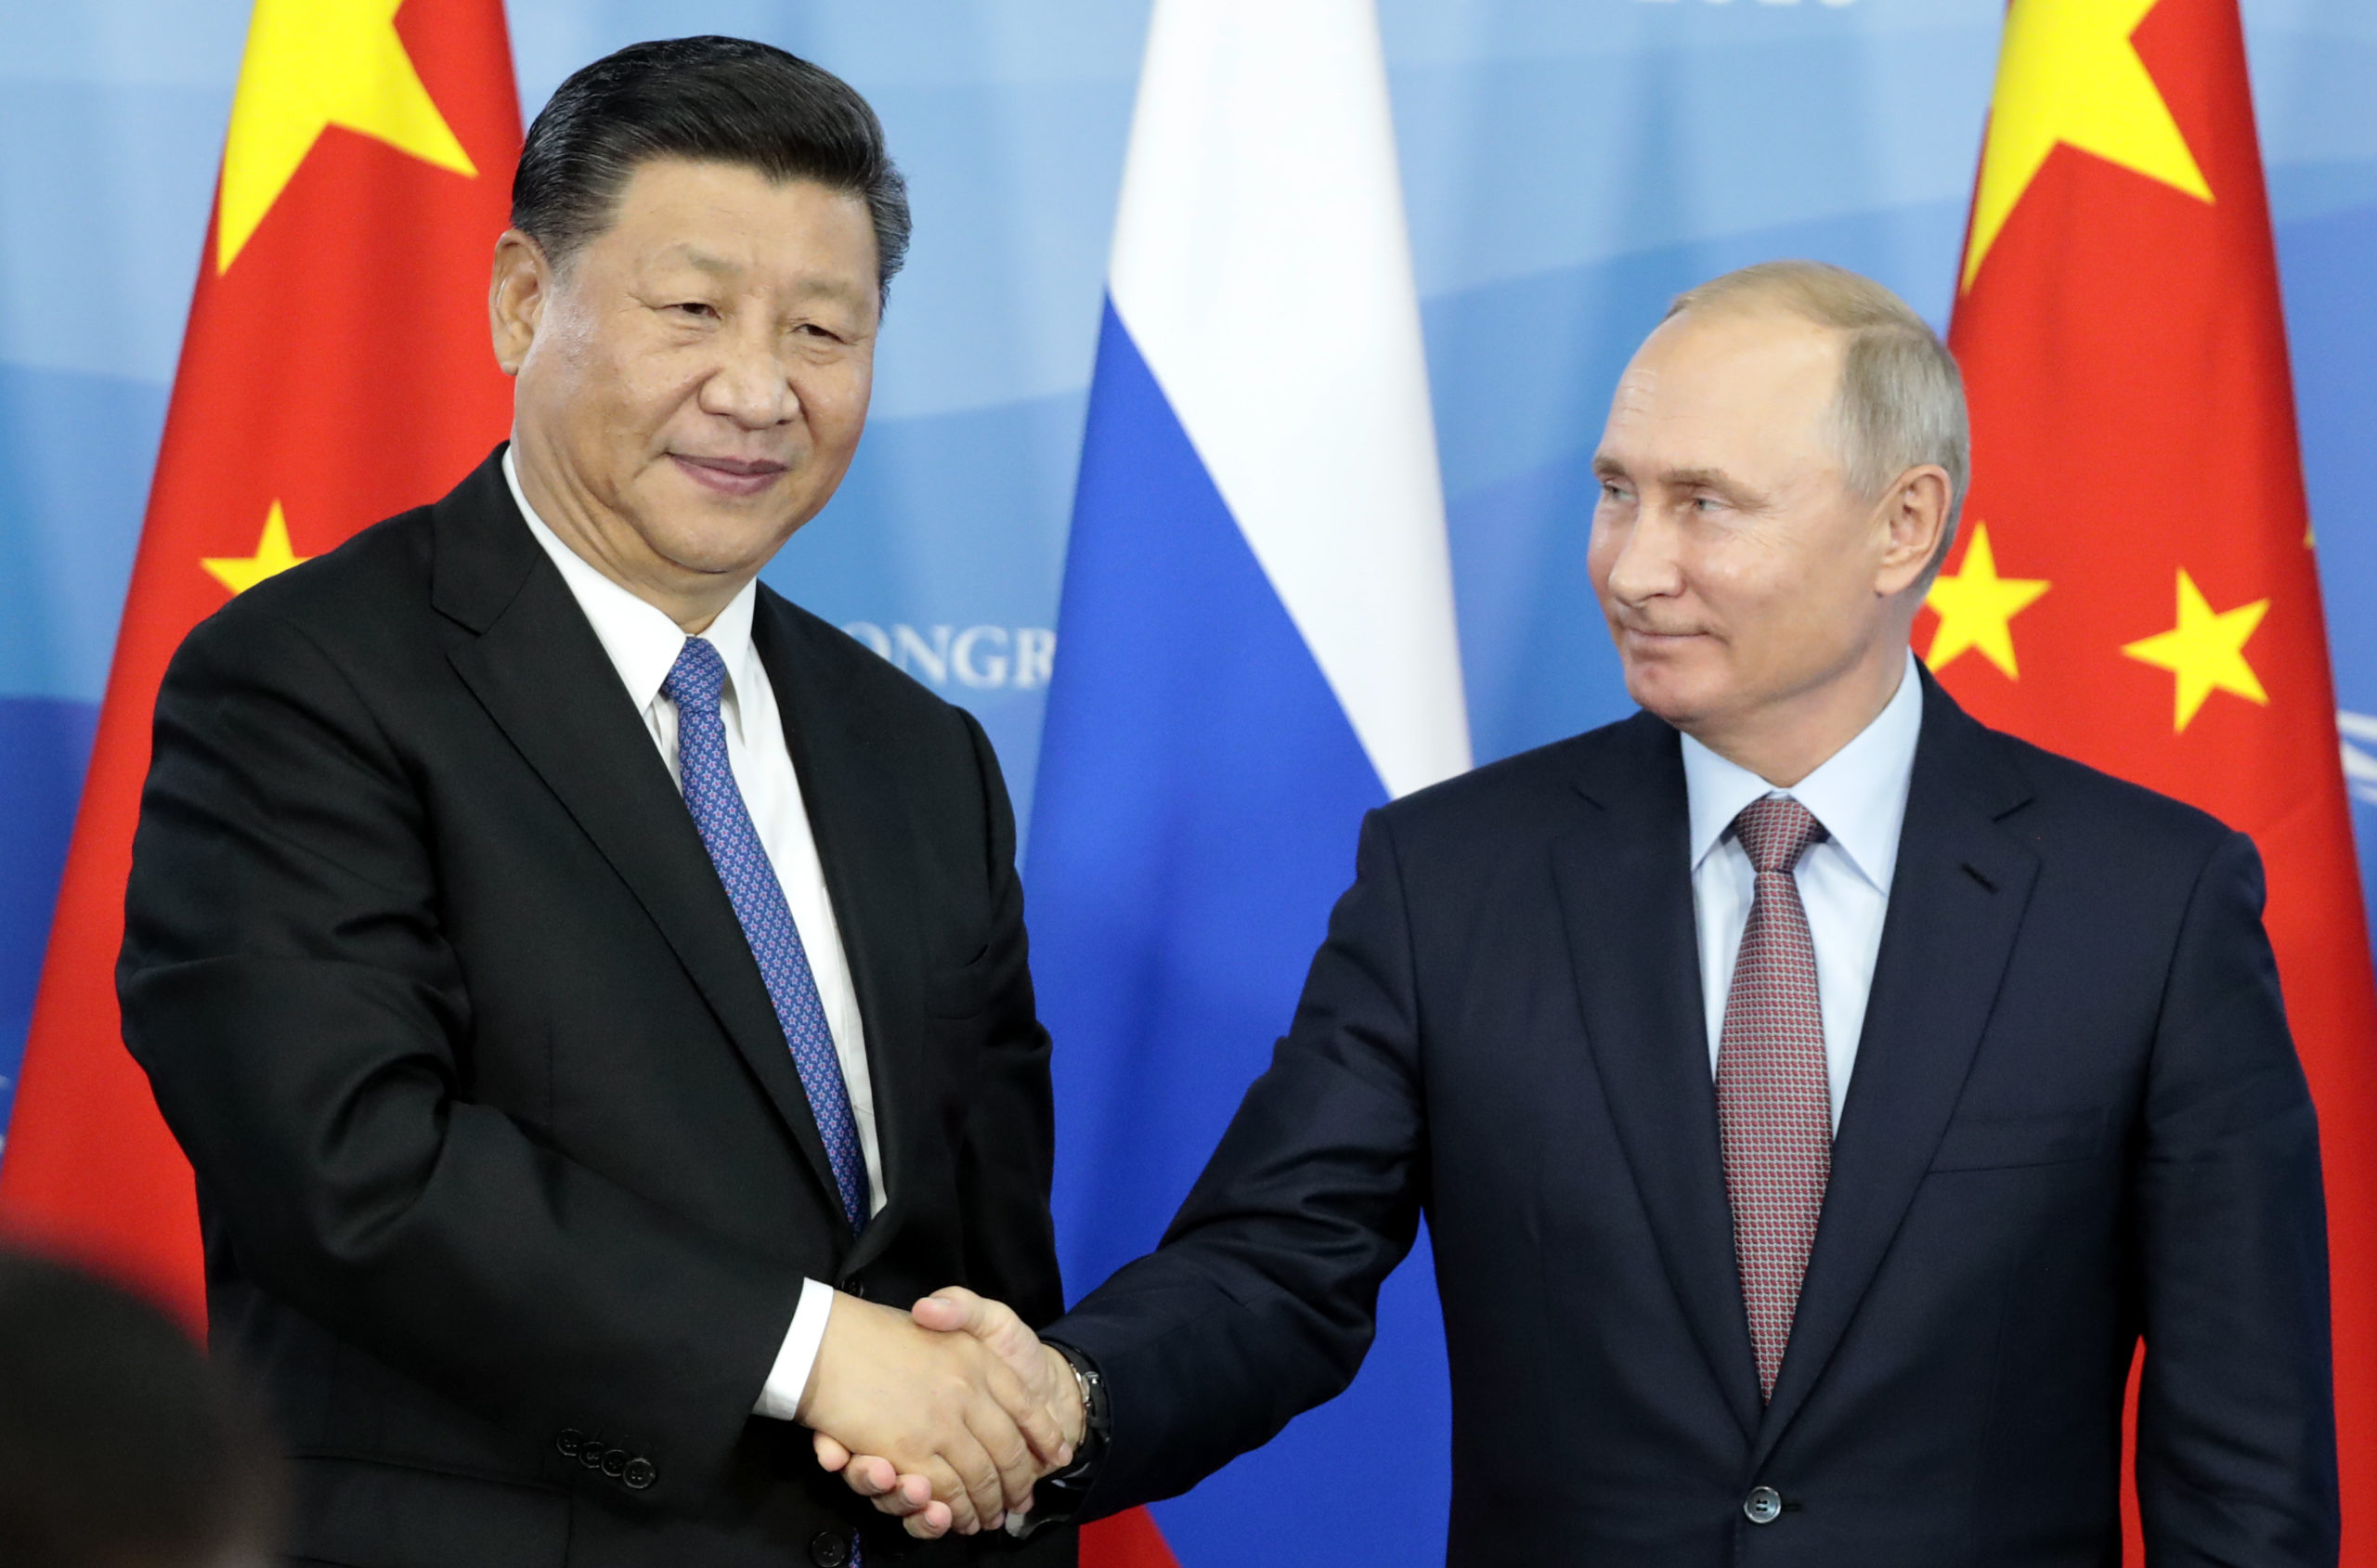 Russia's President Vladimir Putin (R) shakes hands with his China's counterpart Xi Jinping during a signing ceremony following the Russian-Chinese talks on the sidelines of the Eastern Economic Forum in Vladivostok on September 11, 2018. (Photo by SERGEI CHIRIKOV / POOL / AFP) (Photo credit should read SERGEI CHIRIKOV/AFP via Getty Images)